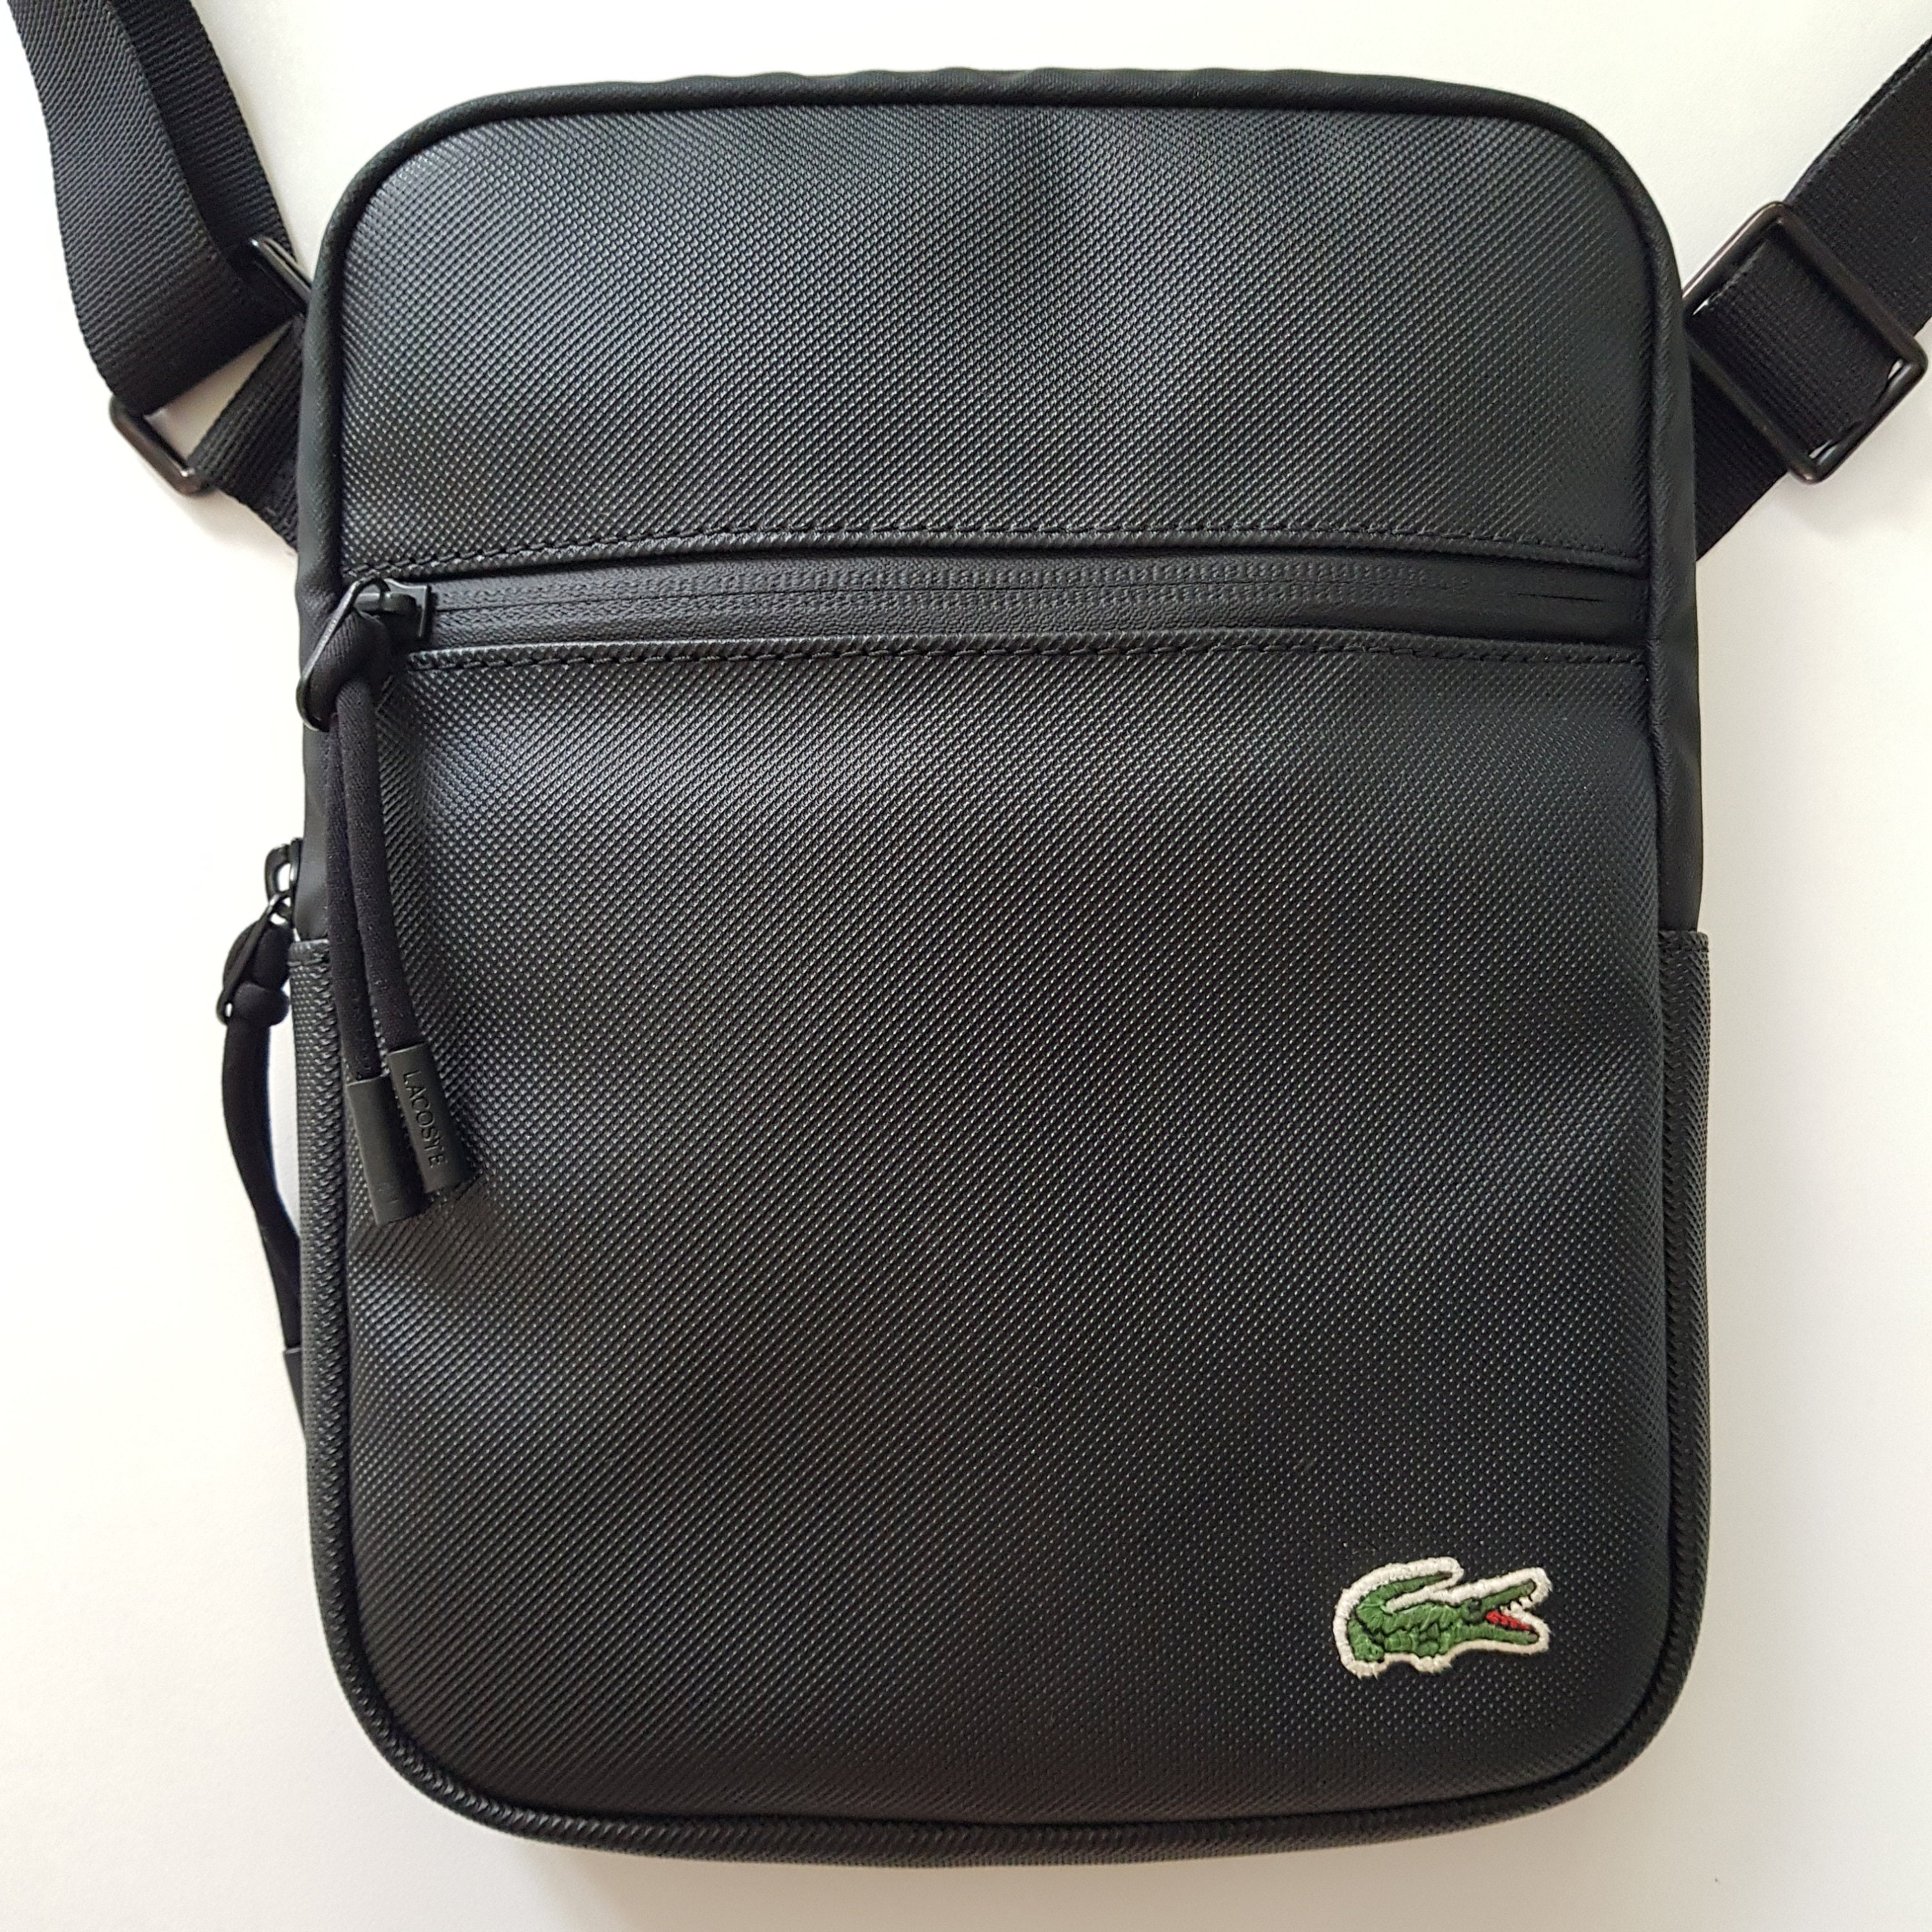 Lacoste, Bags